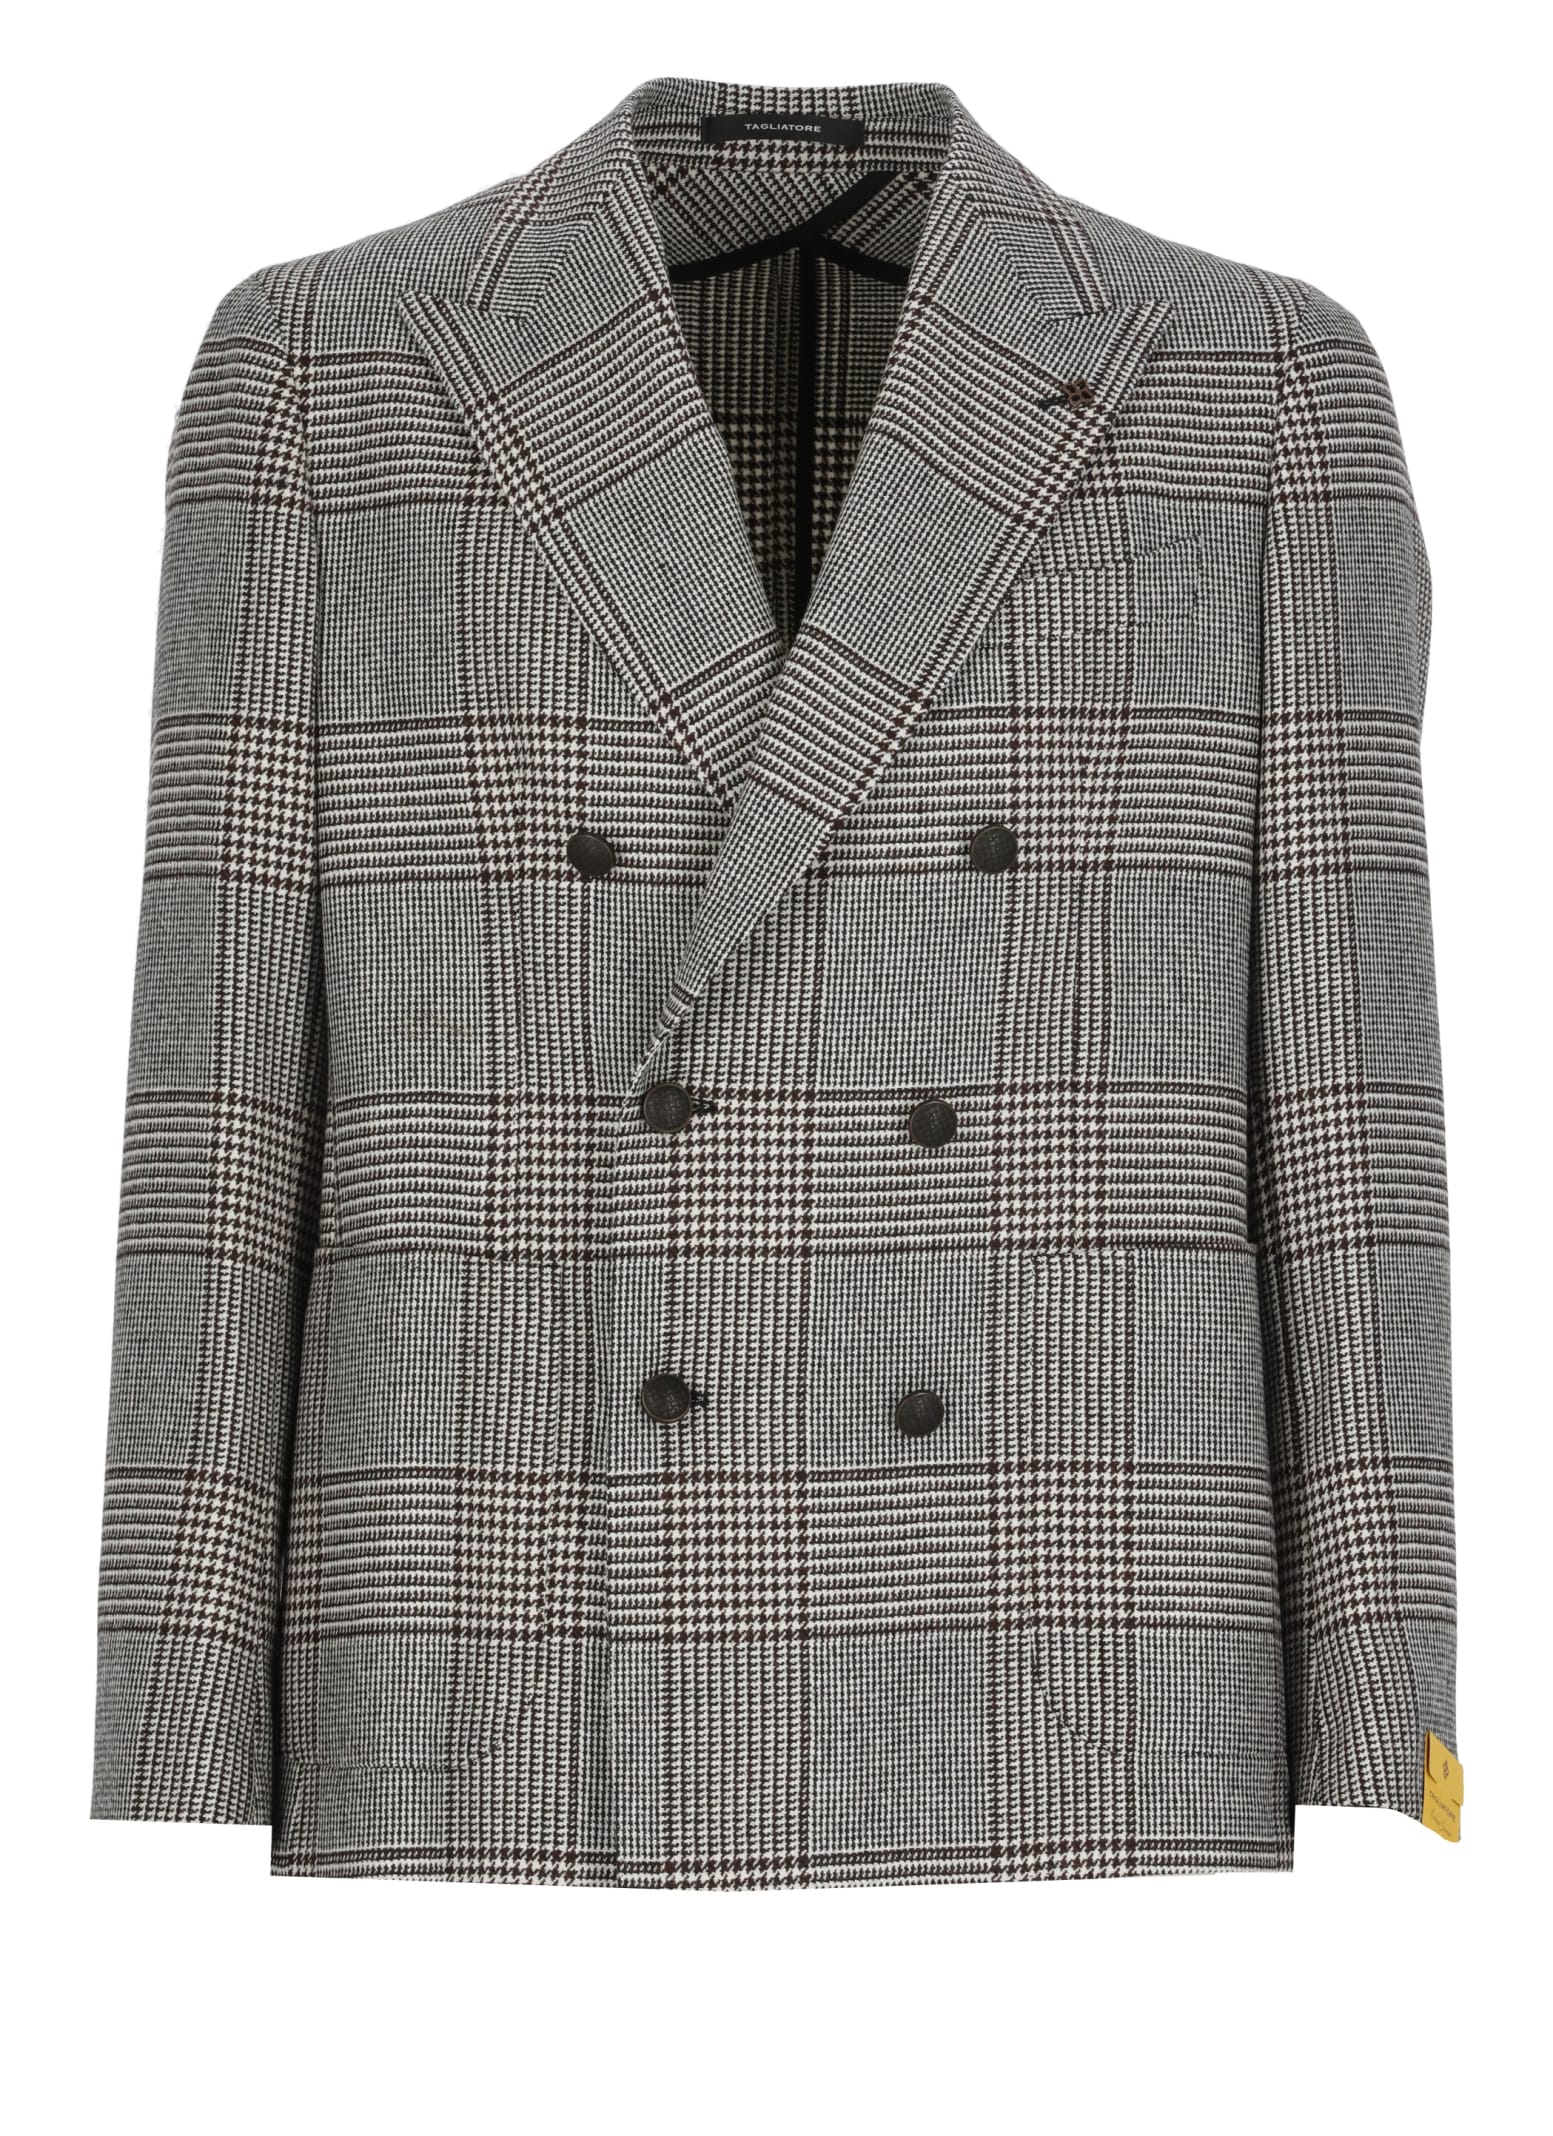 Tagliatore Wool Double-breasted Jacket